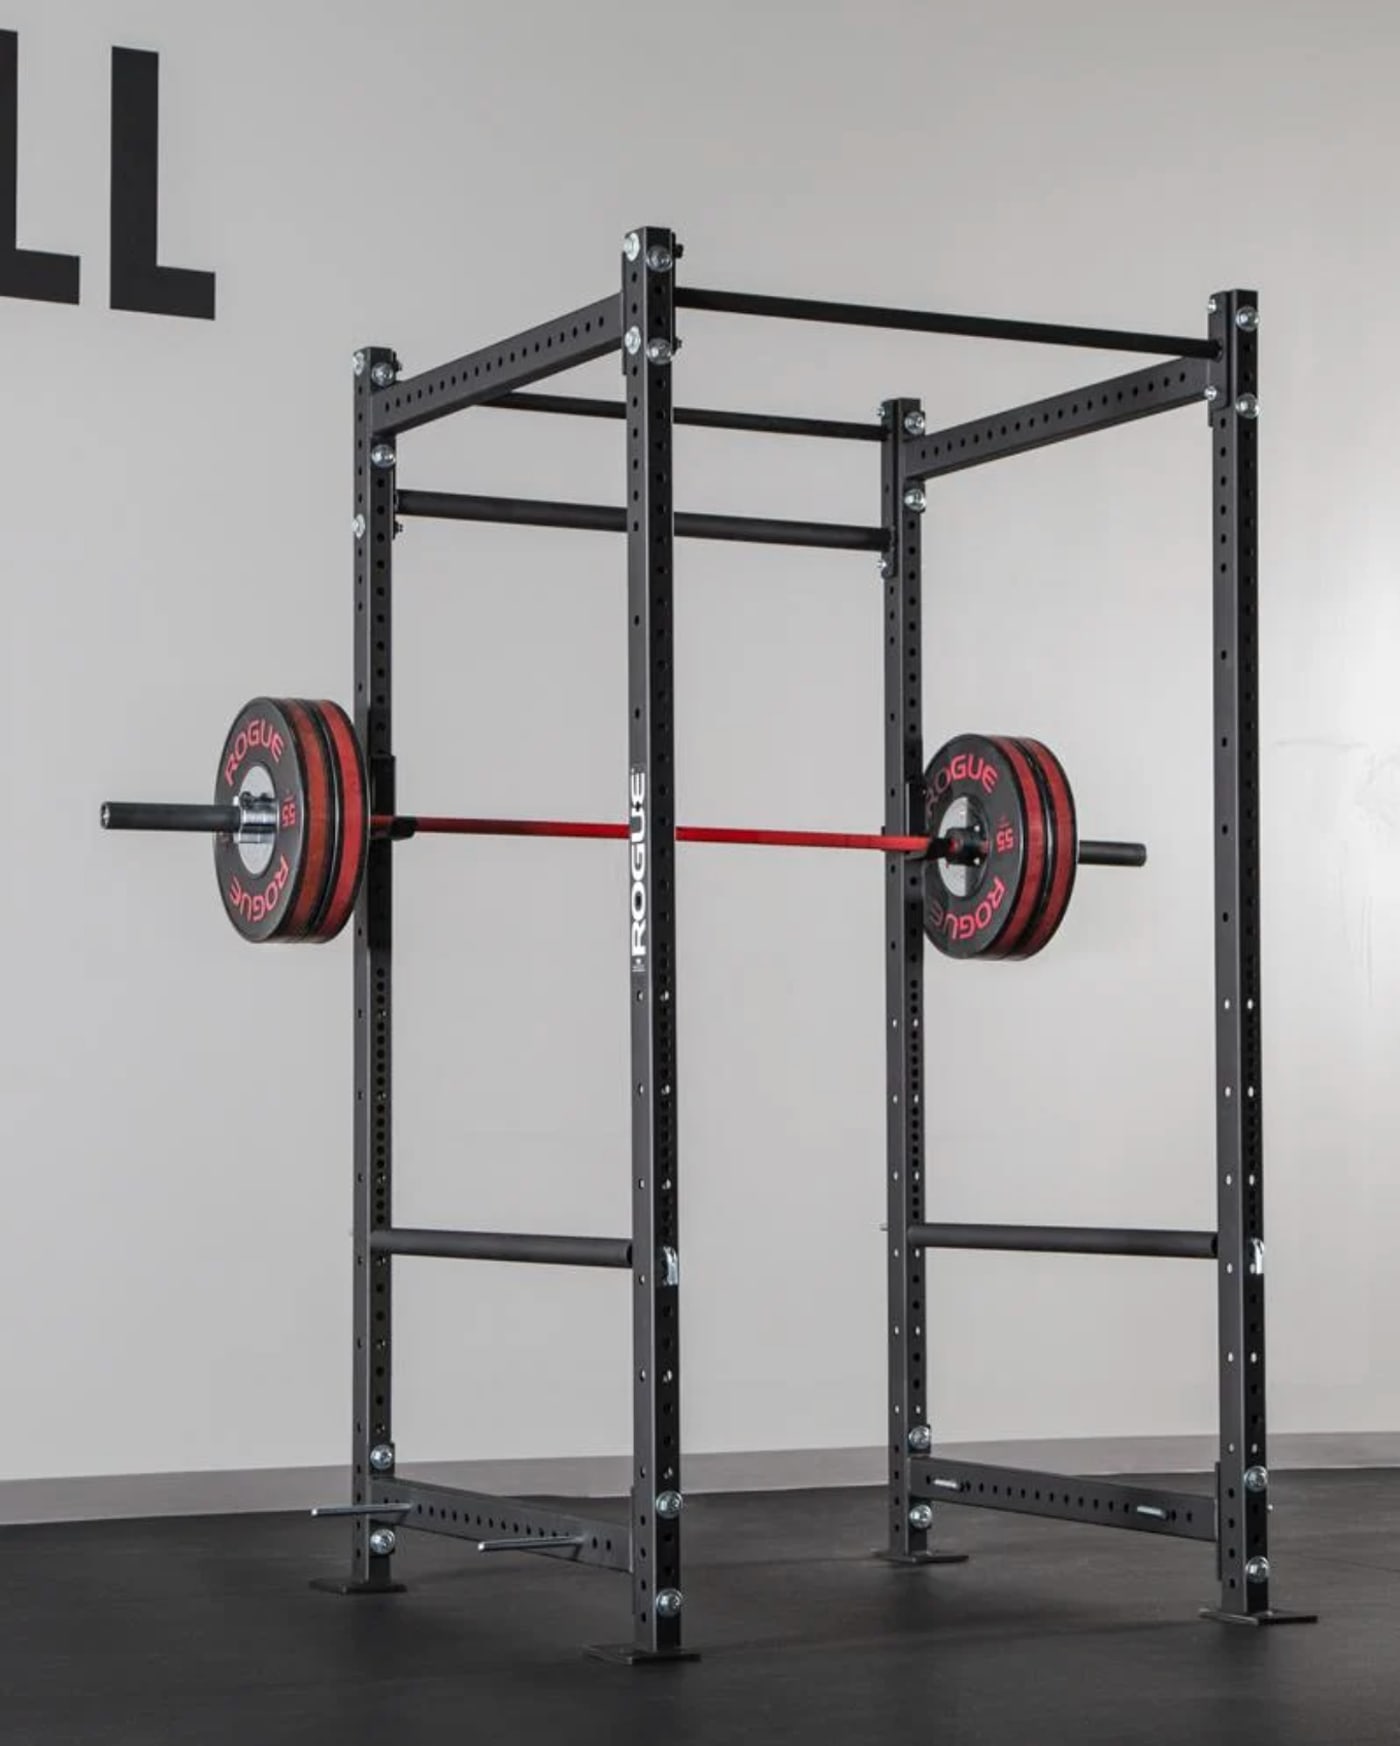 6 Months Later: Fitness Reality 810xlt Budget Squat Rack w/ Lat Pulldown  Attachment 